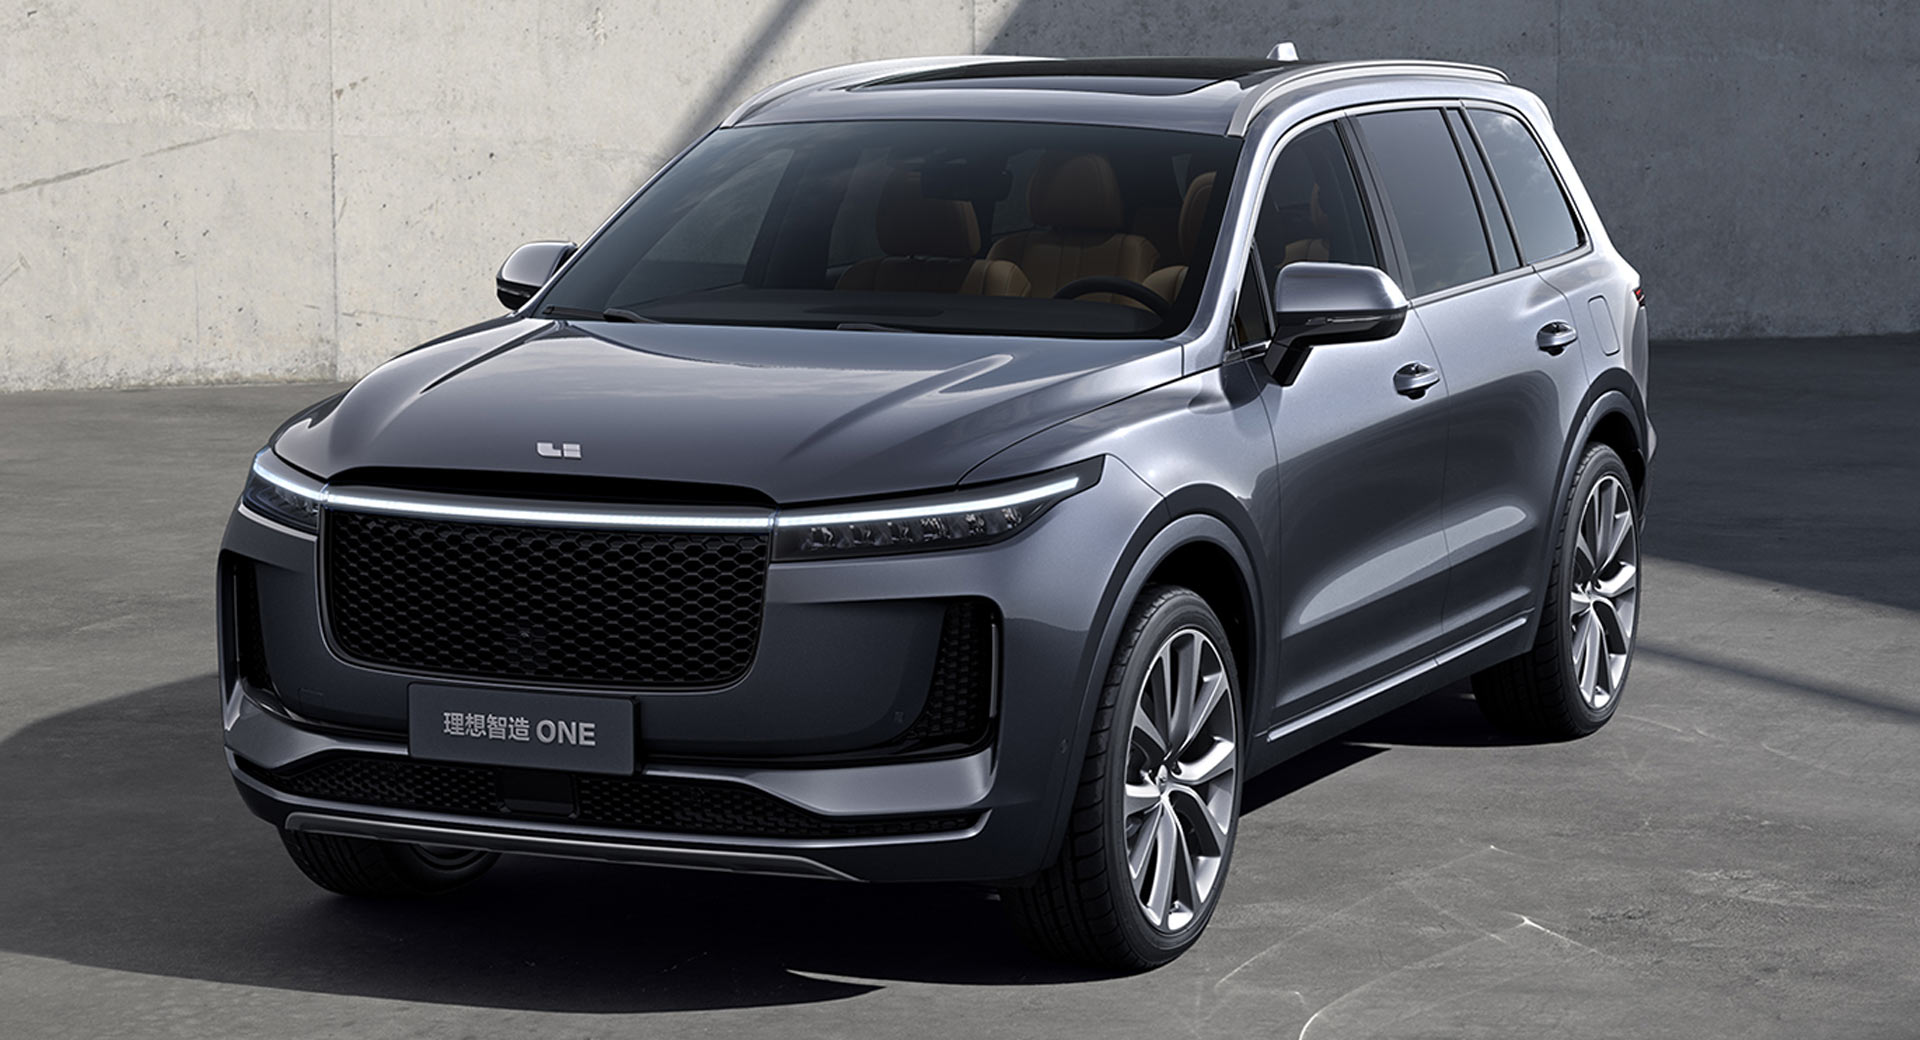 Li Xiang Launches With “One” SUV With Six Seats, Four Screens, Hybrid